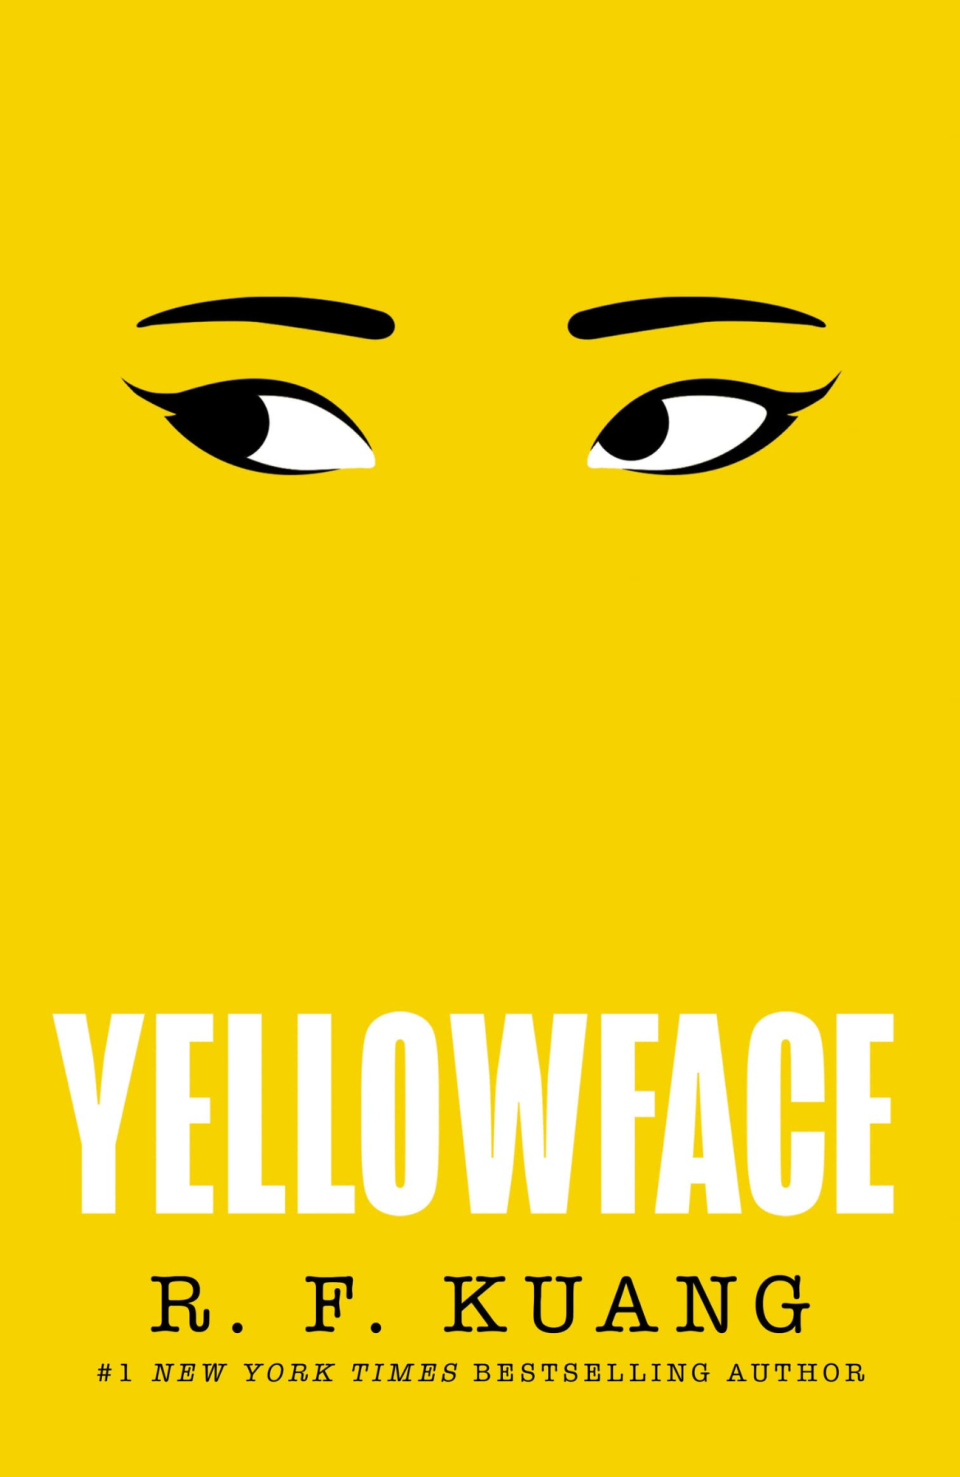 Book cover of Yellowface by R.F. Kuang showing a graphic of eyes and eyebrows on a yellow background